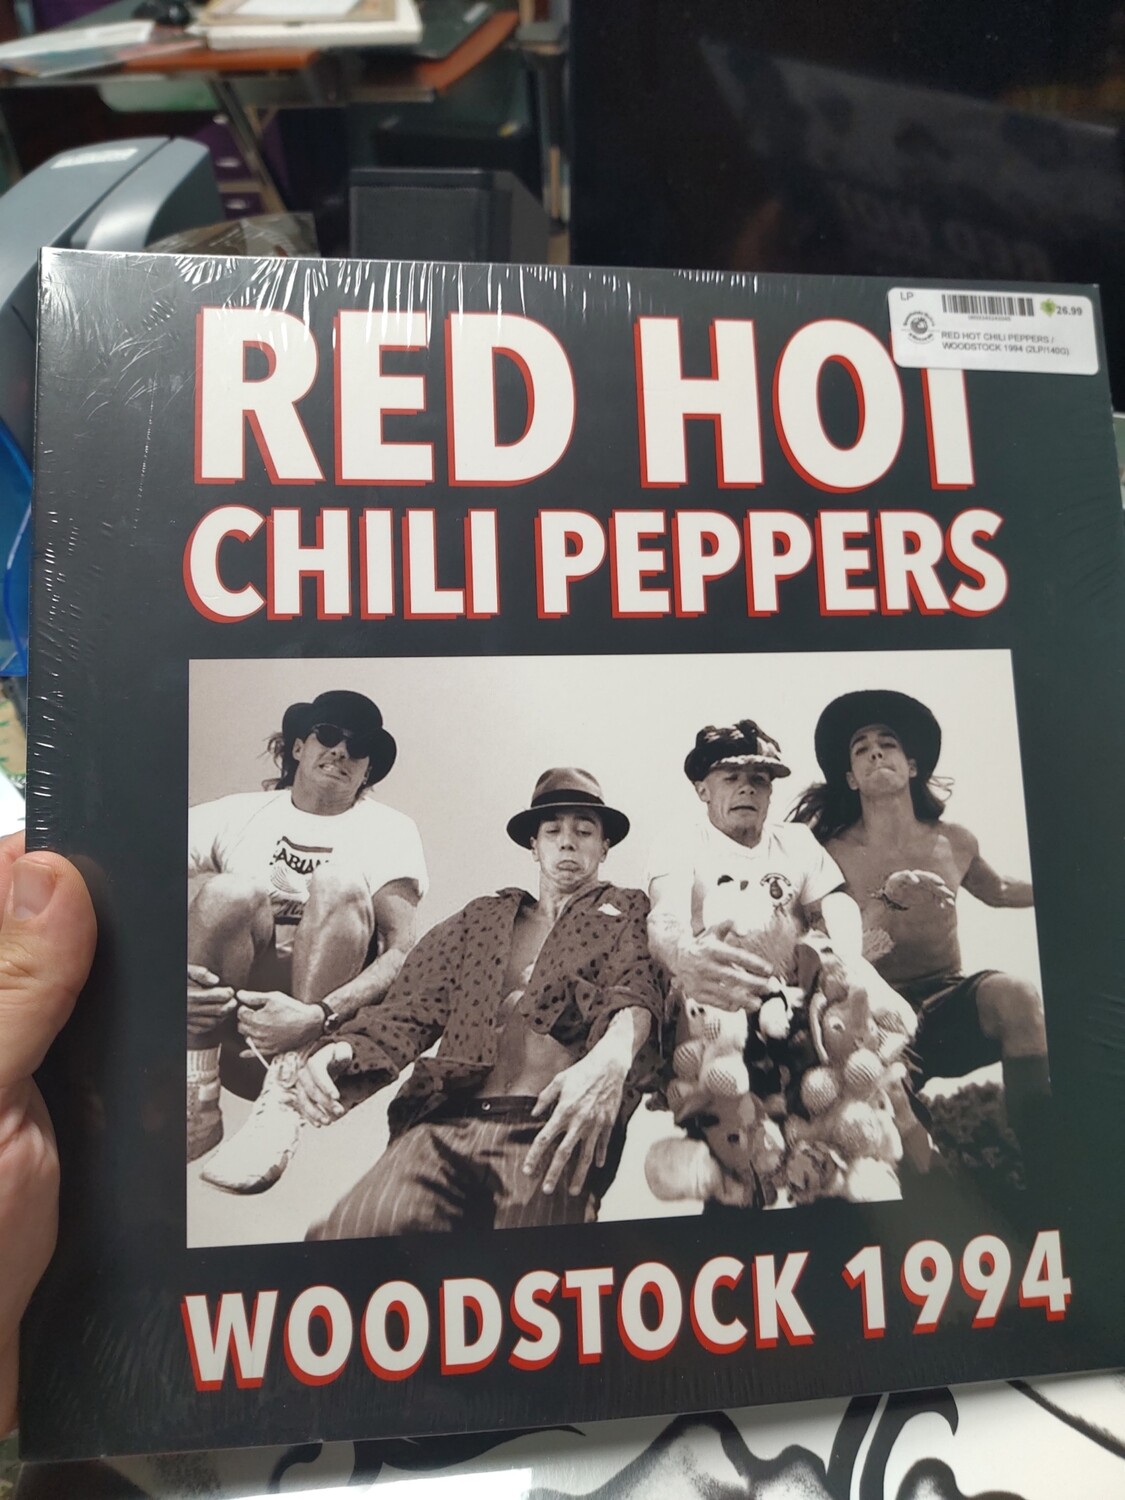 Red Hot chili peppers / Woodstock 1994